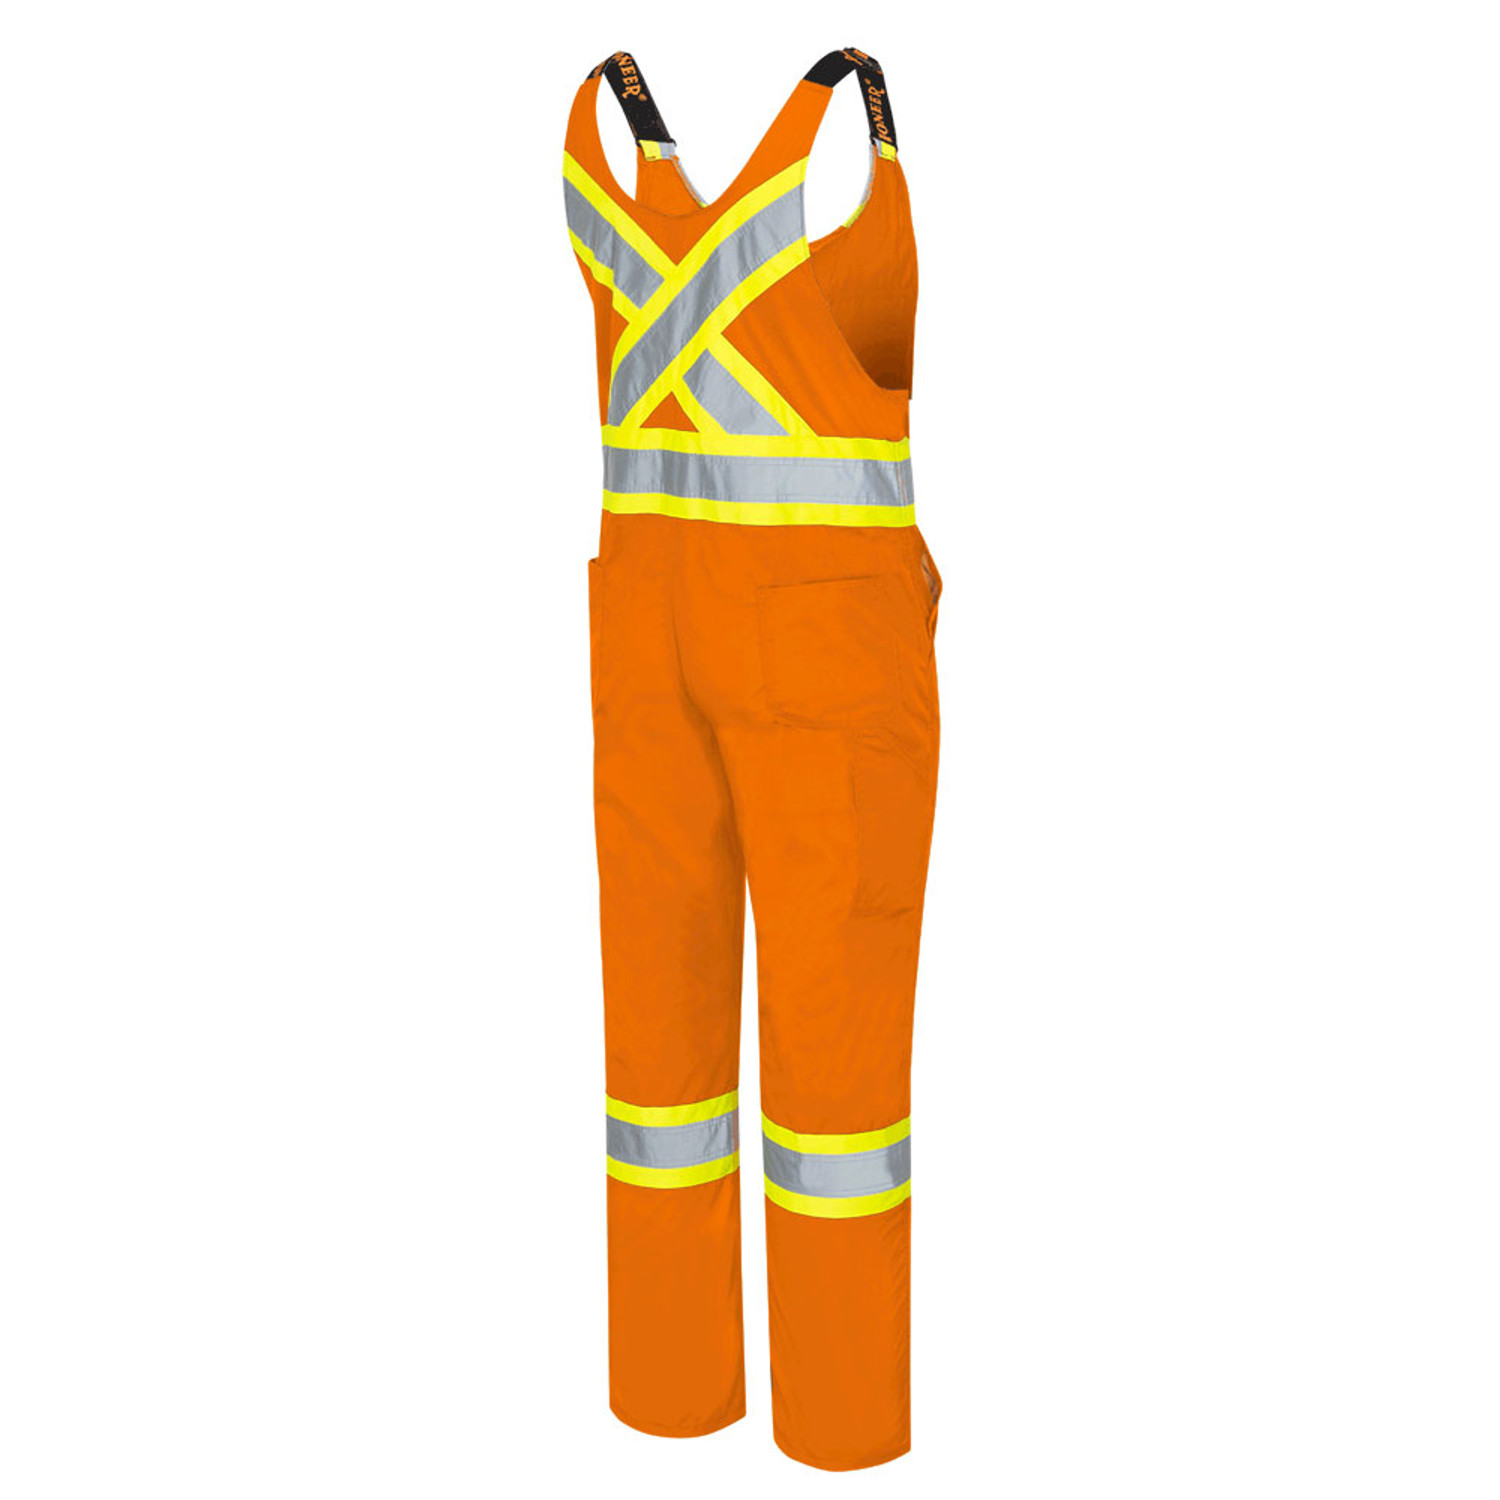 https://cdn11.bigcommerce.com/s-10f42/images/stencil/1500x1500/products/150/6410/pioneer-overalls-safetywear.ca__65645.1632164788.jpg?c=2?imbypass=on